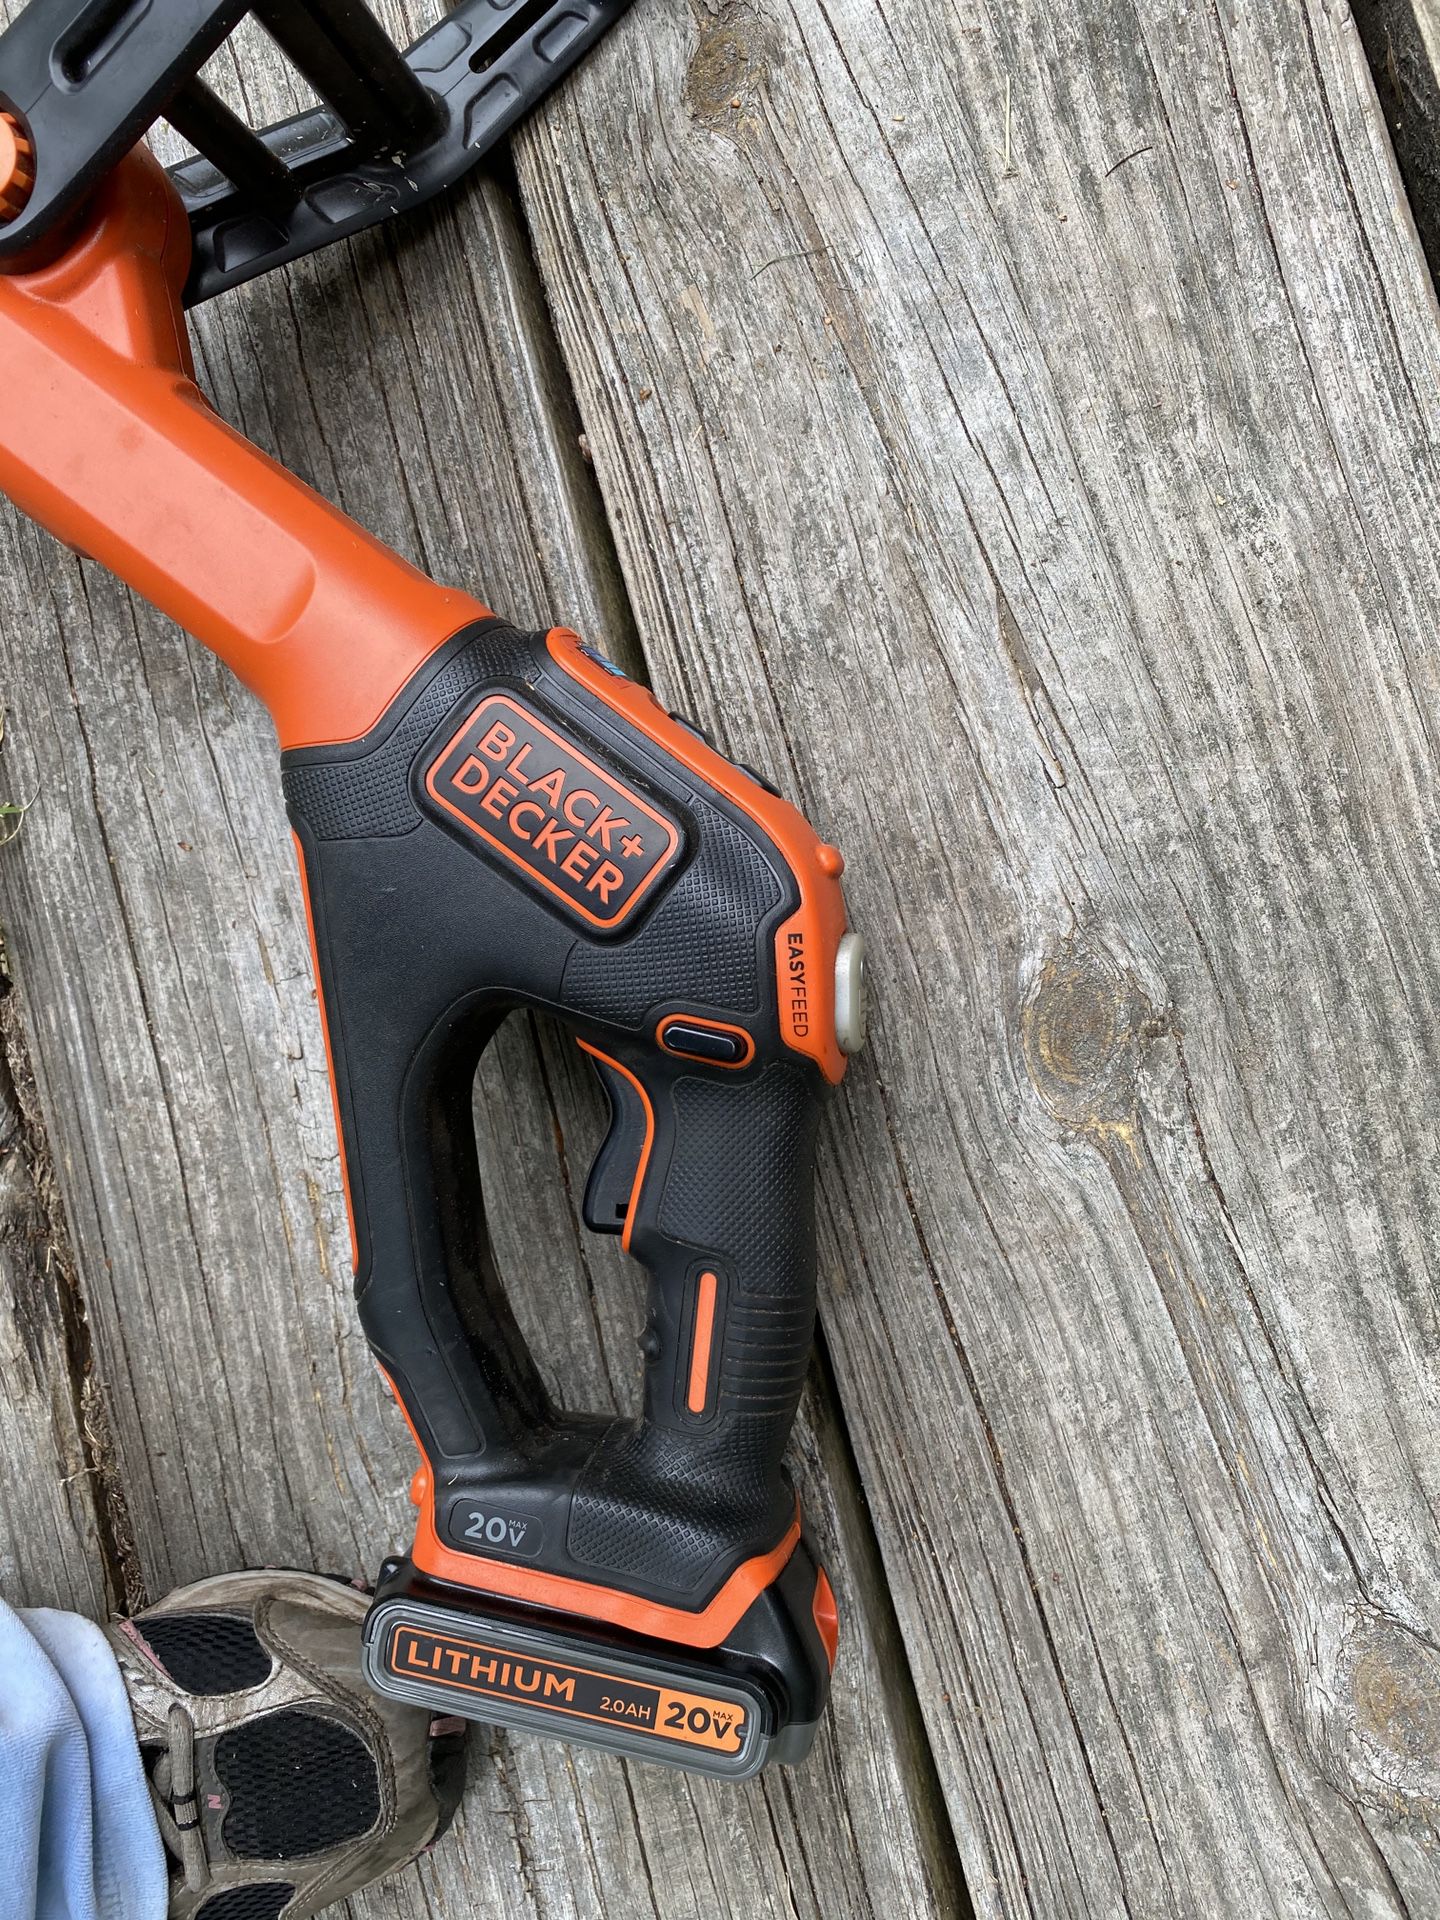 Black + Decker 20V Weed Eater with 3 Batteries and Charger